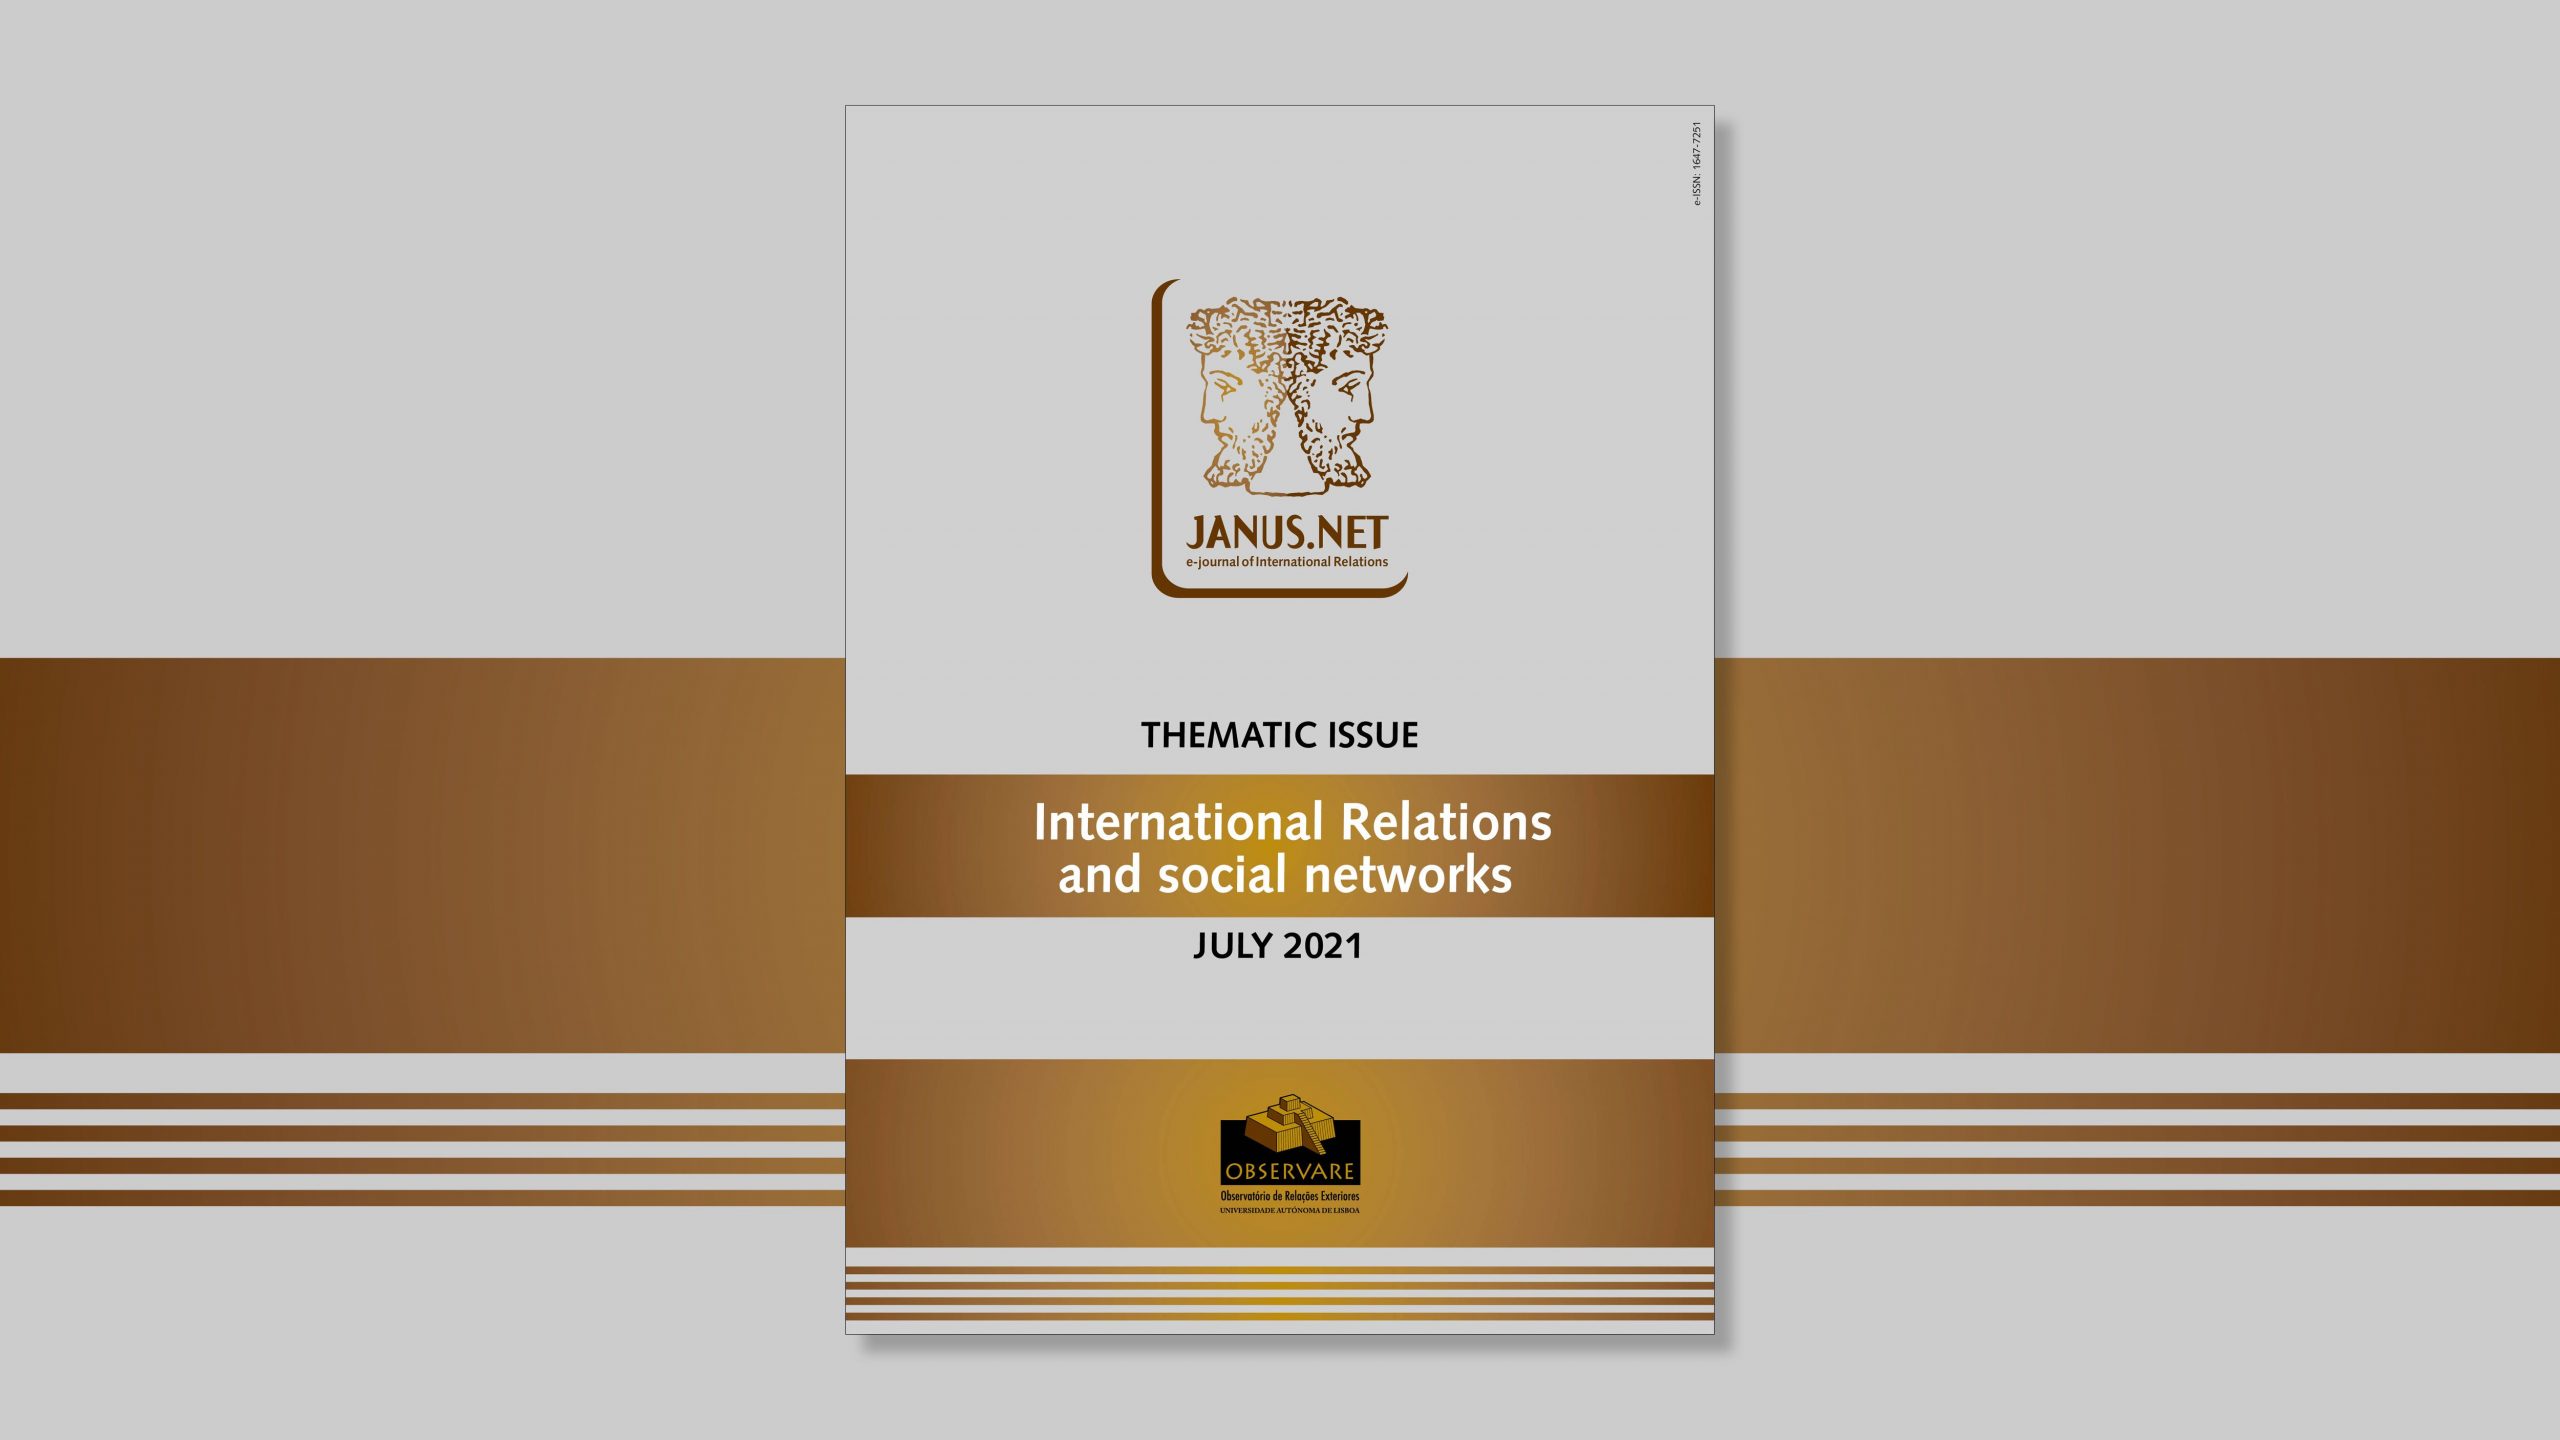 JANUS.NET – THEMATIC DOSSIER: INTERNATIONAL RELATIONS AND SOCIAL NETWORKS